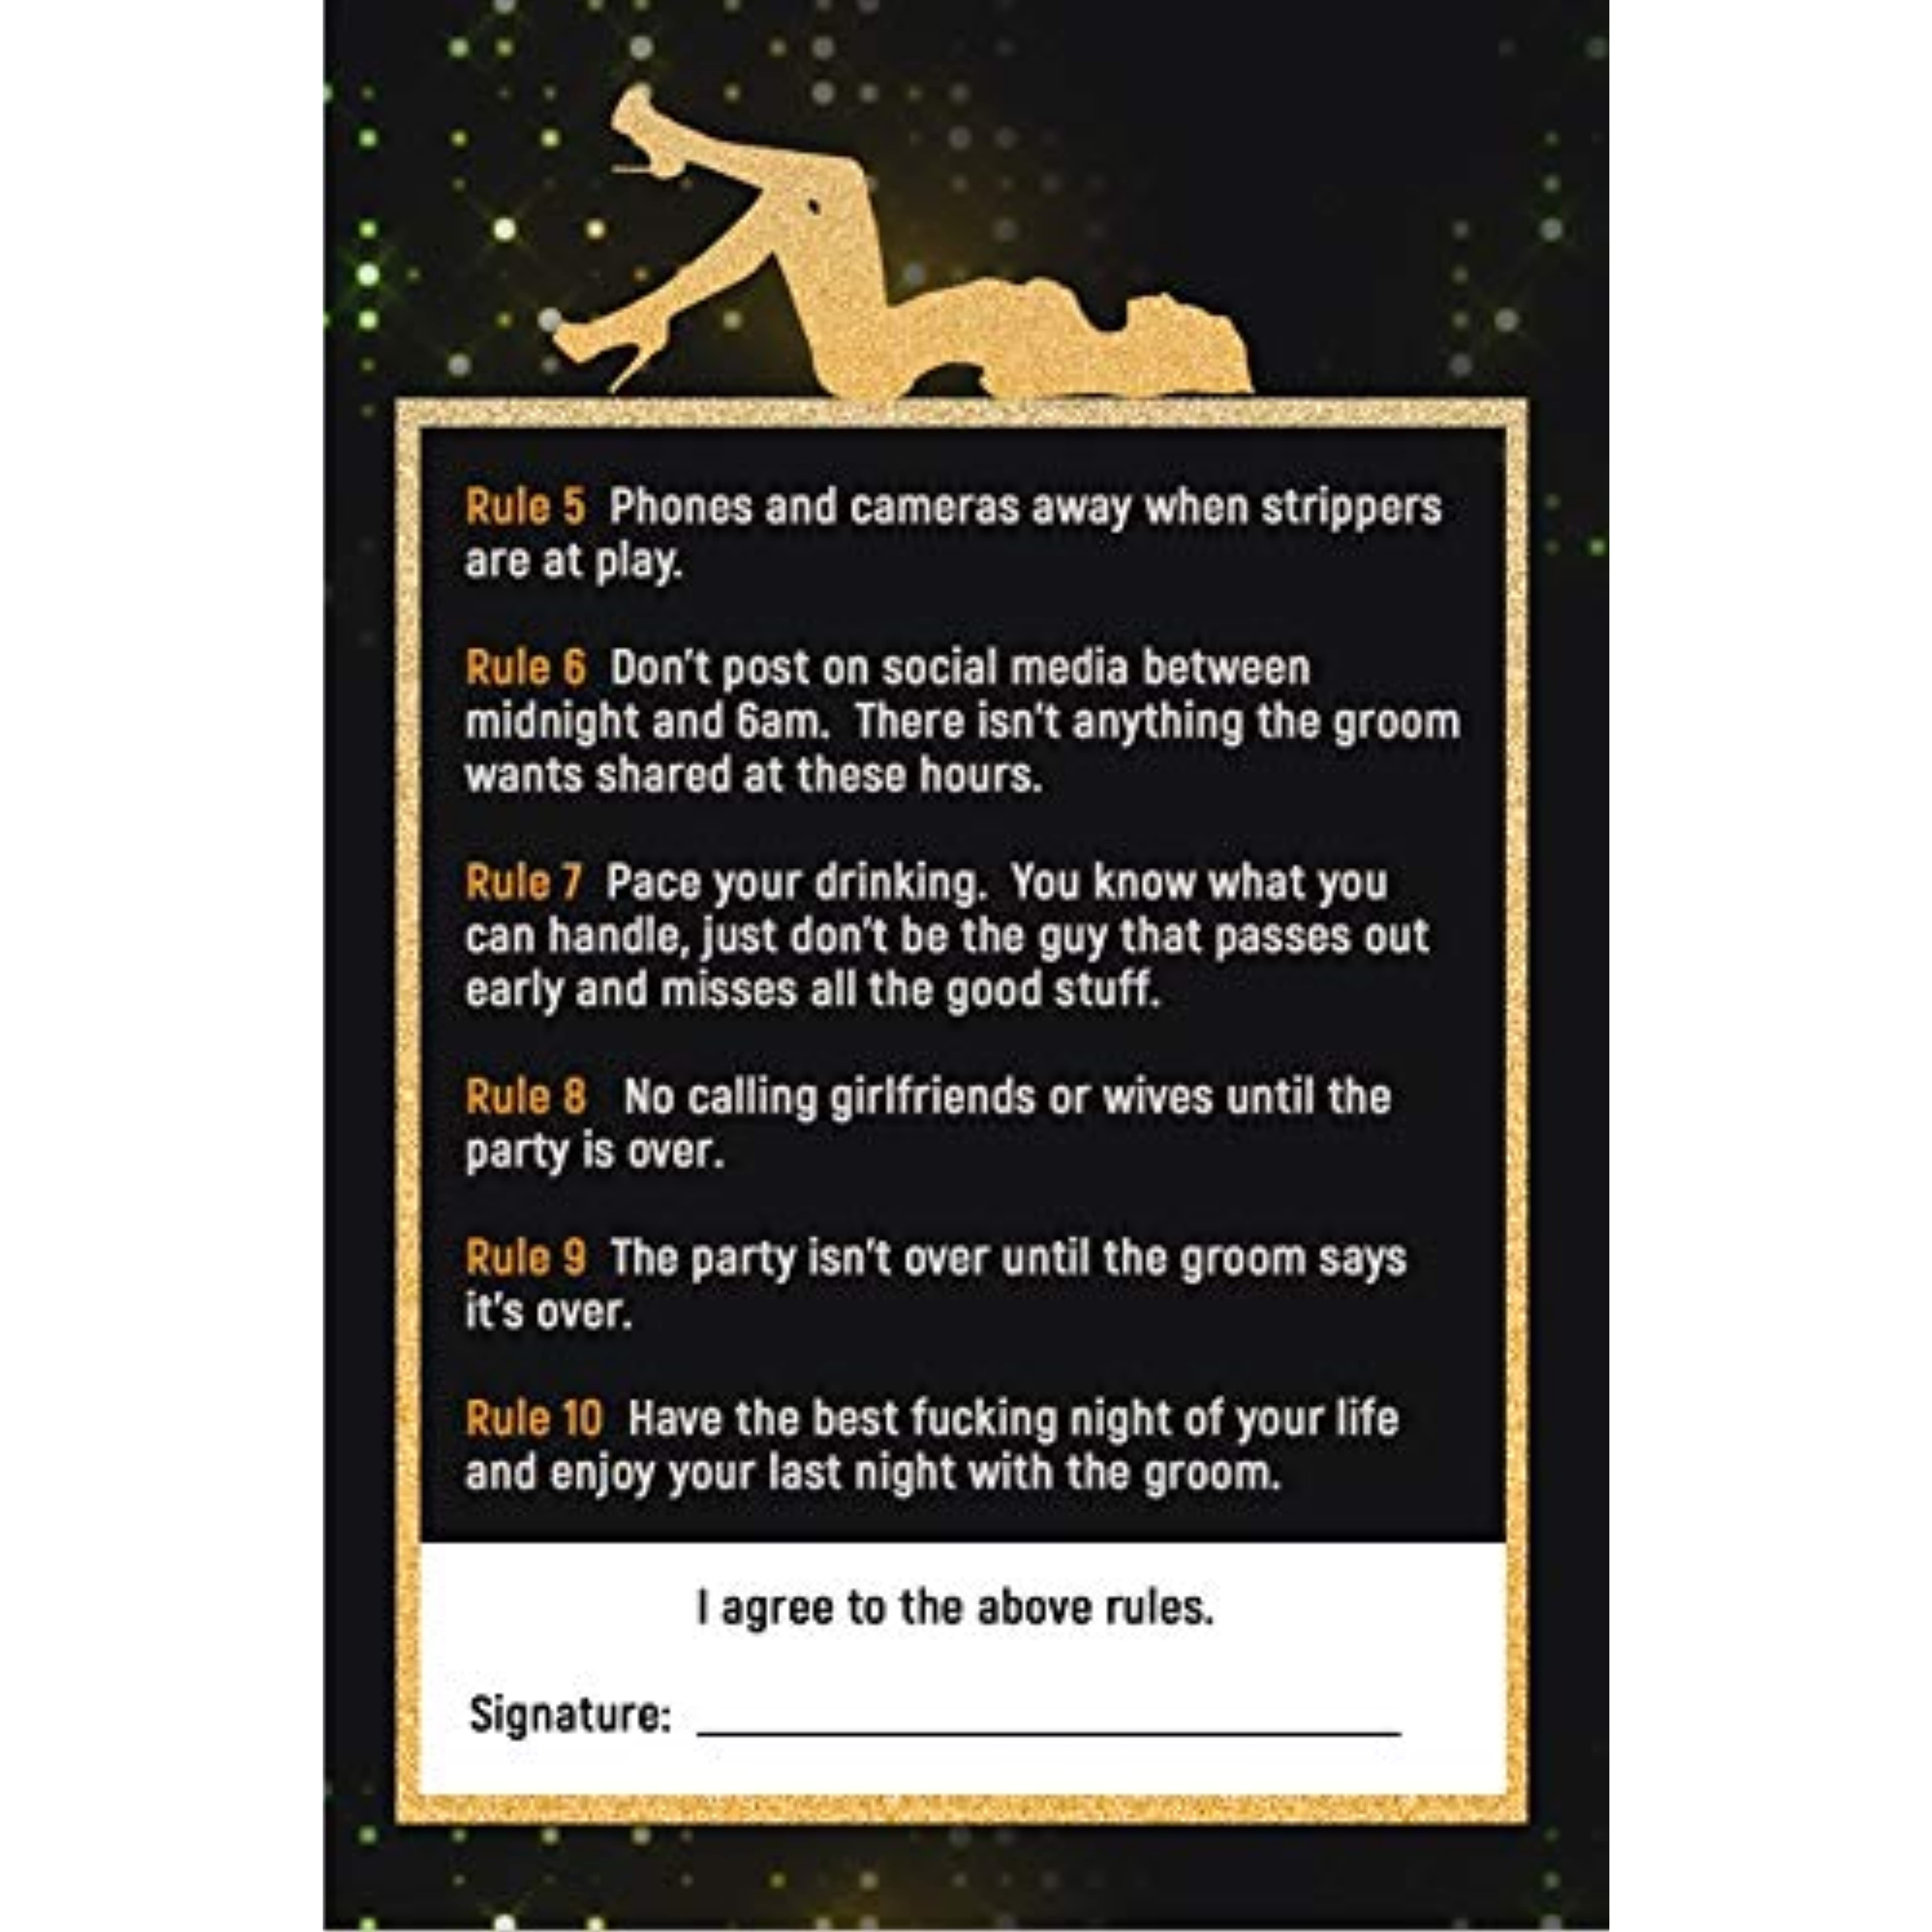 BroSash Funny Bachelor Party Decorations (Gold Bachelor Banner, Bachelor Sash, 16 Funny Party Balloons, and 8 Bachelor Party Rules Cards) 26 Piece Set, Bachelorette Party Supplies Gifts pic